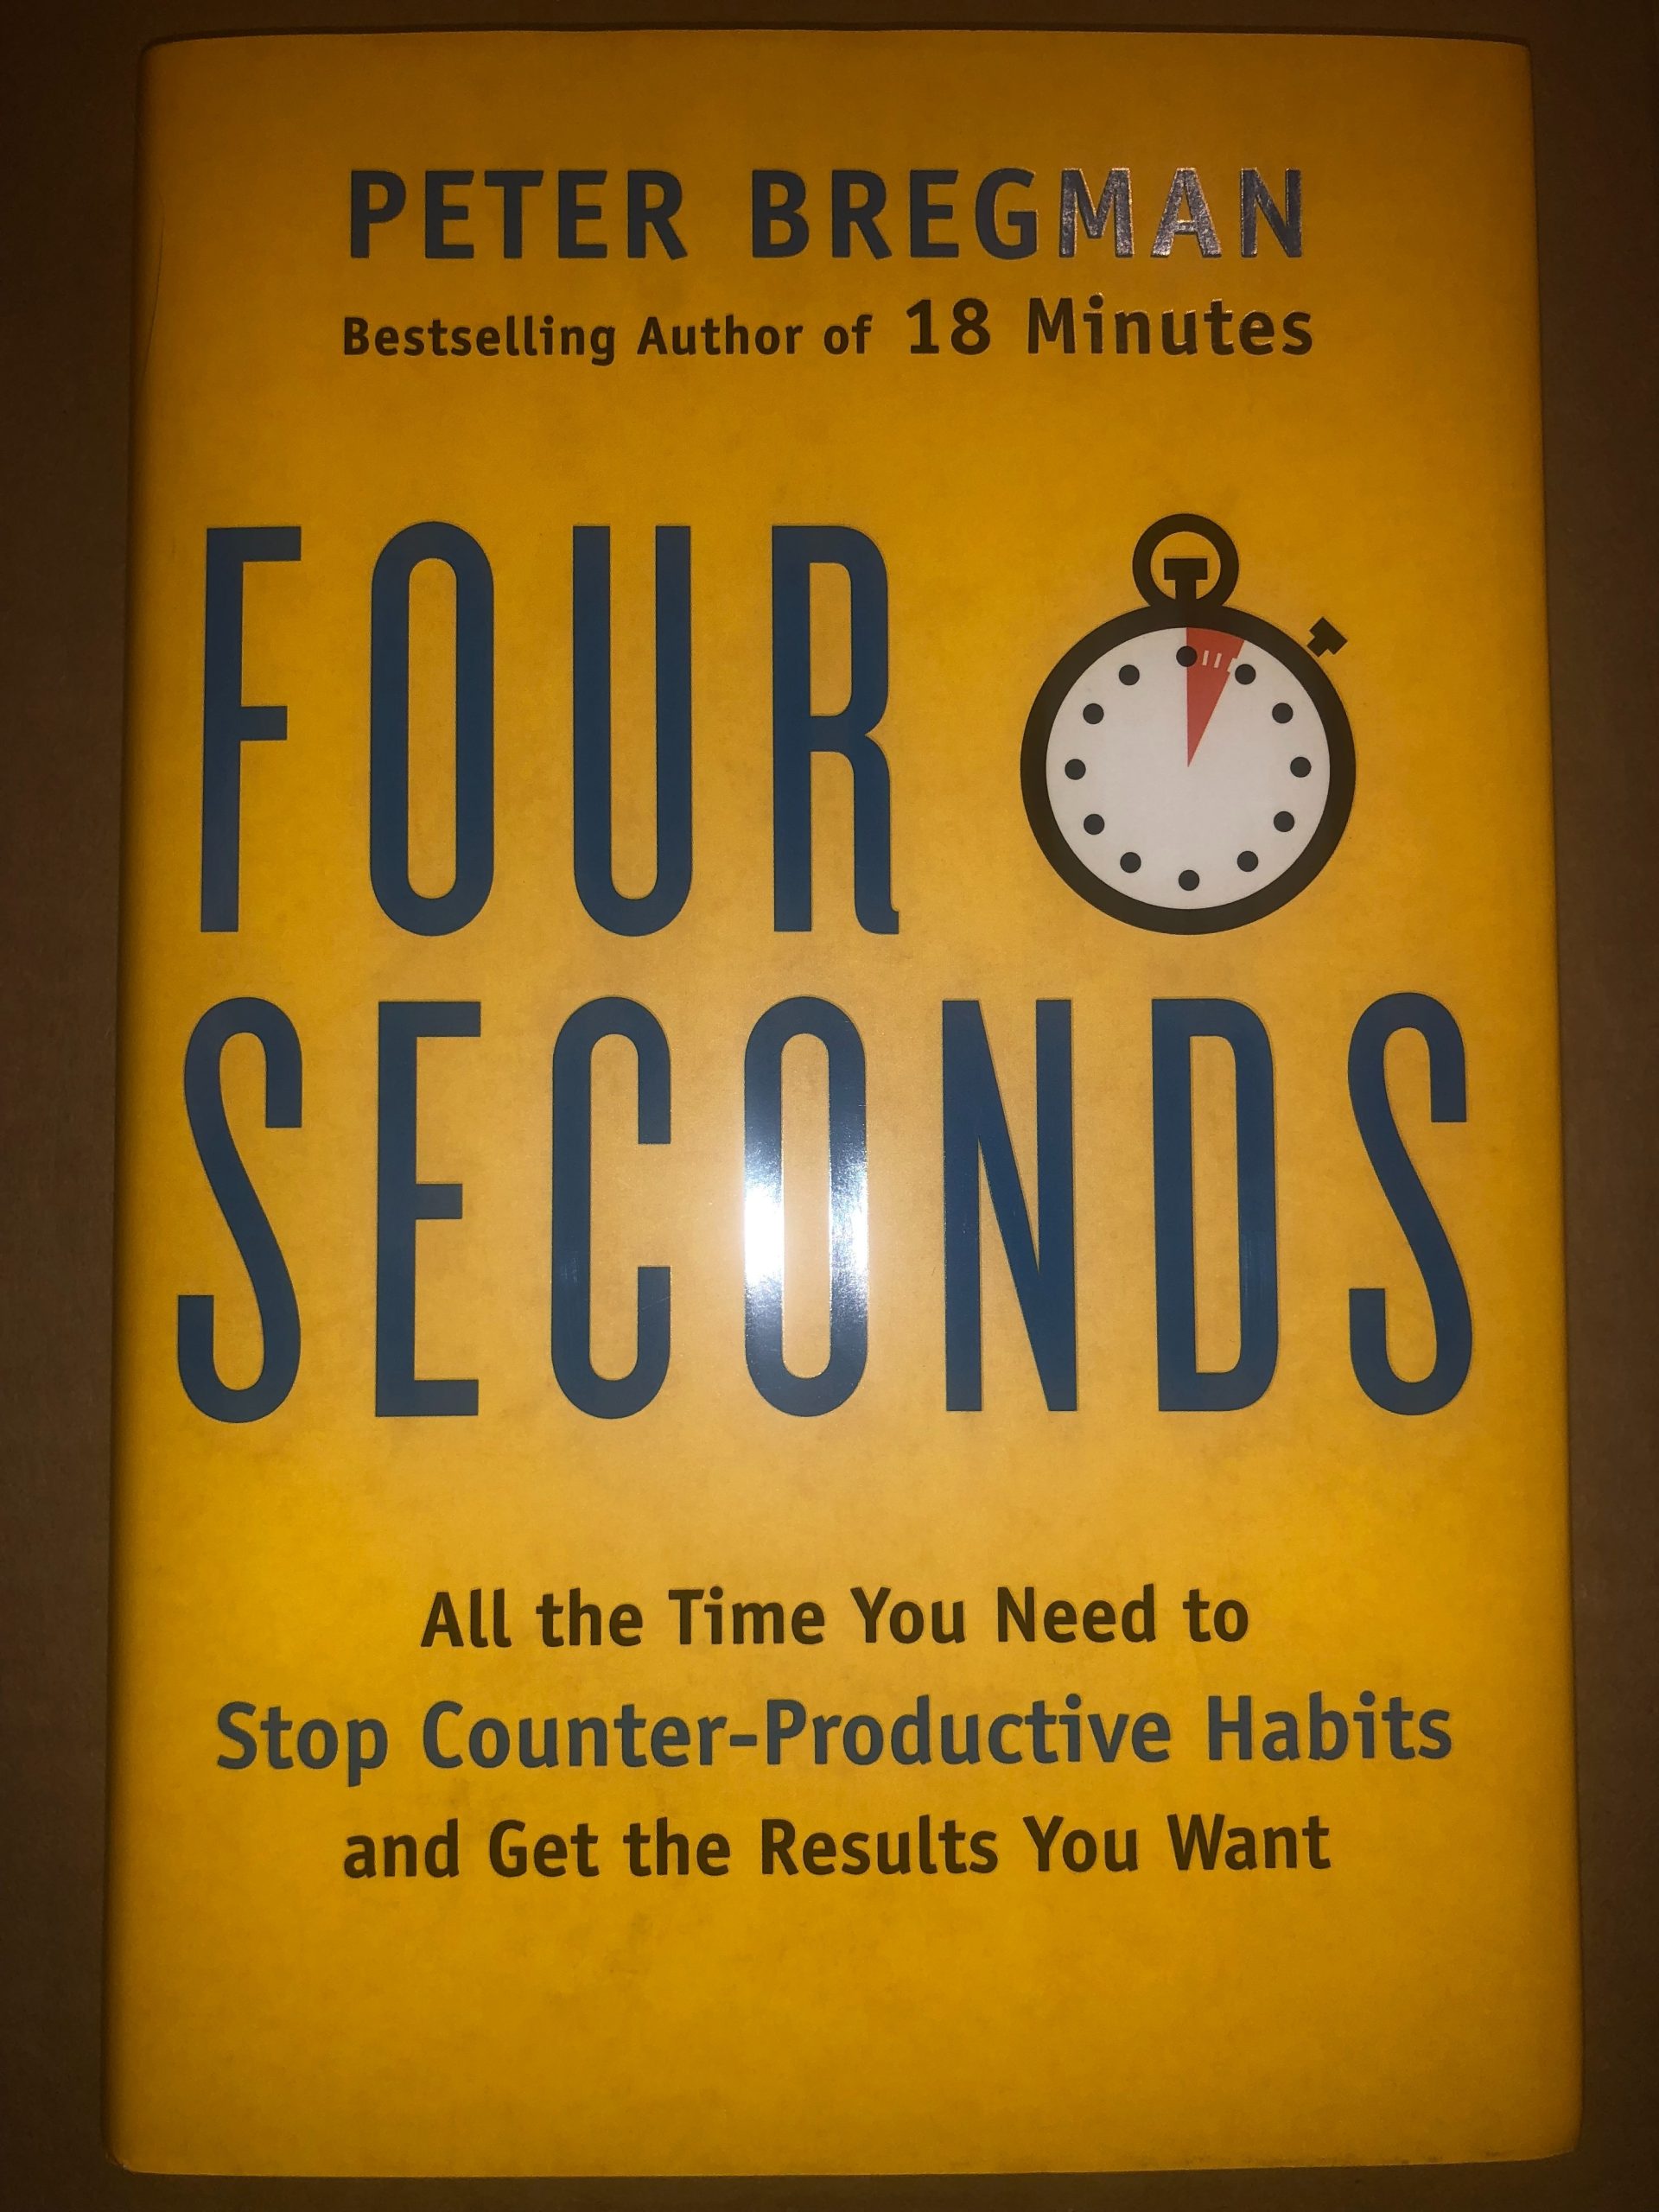 Four Seconds by Peter Bregman (Hardcover)